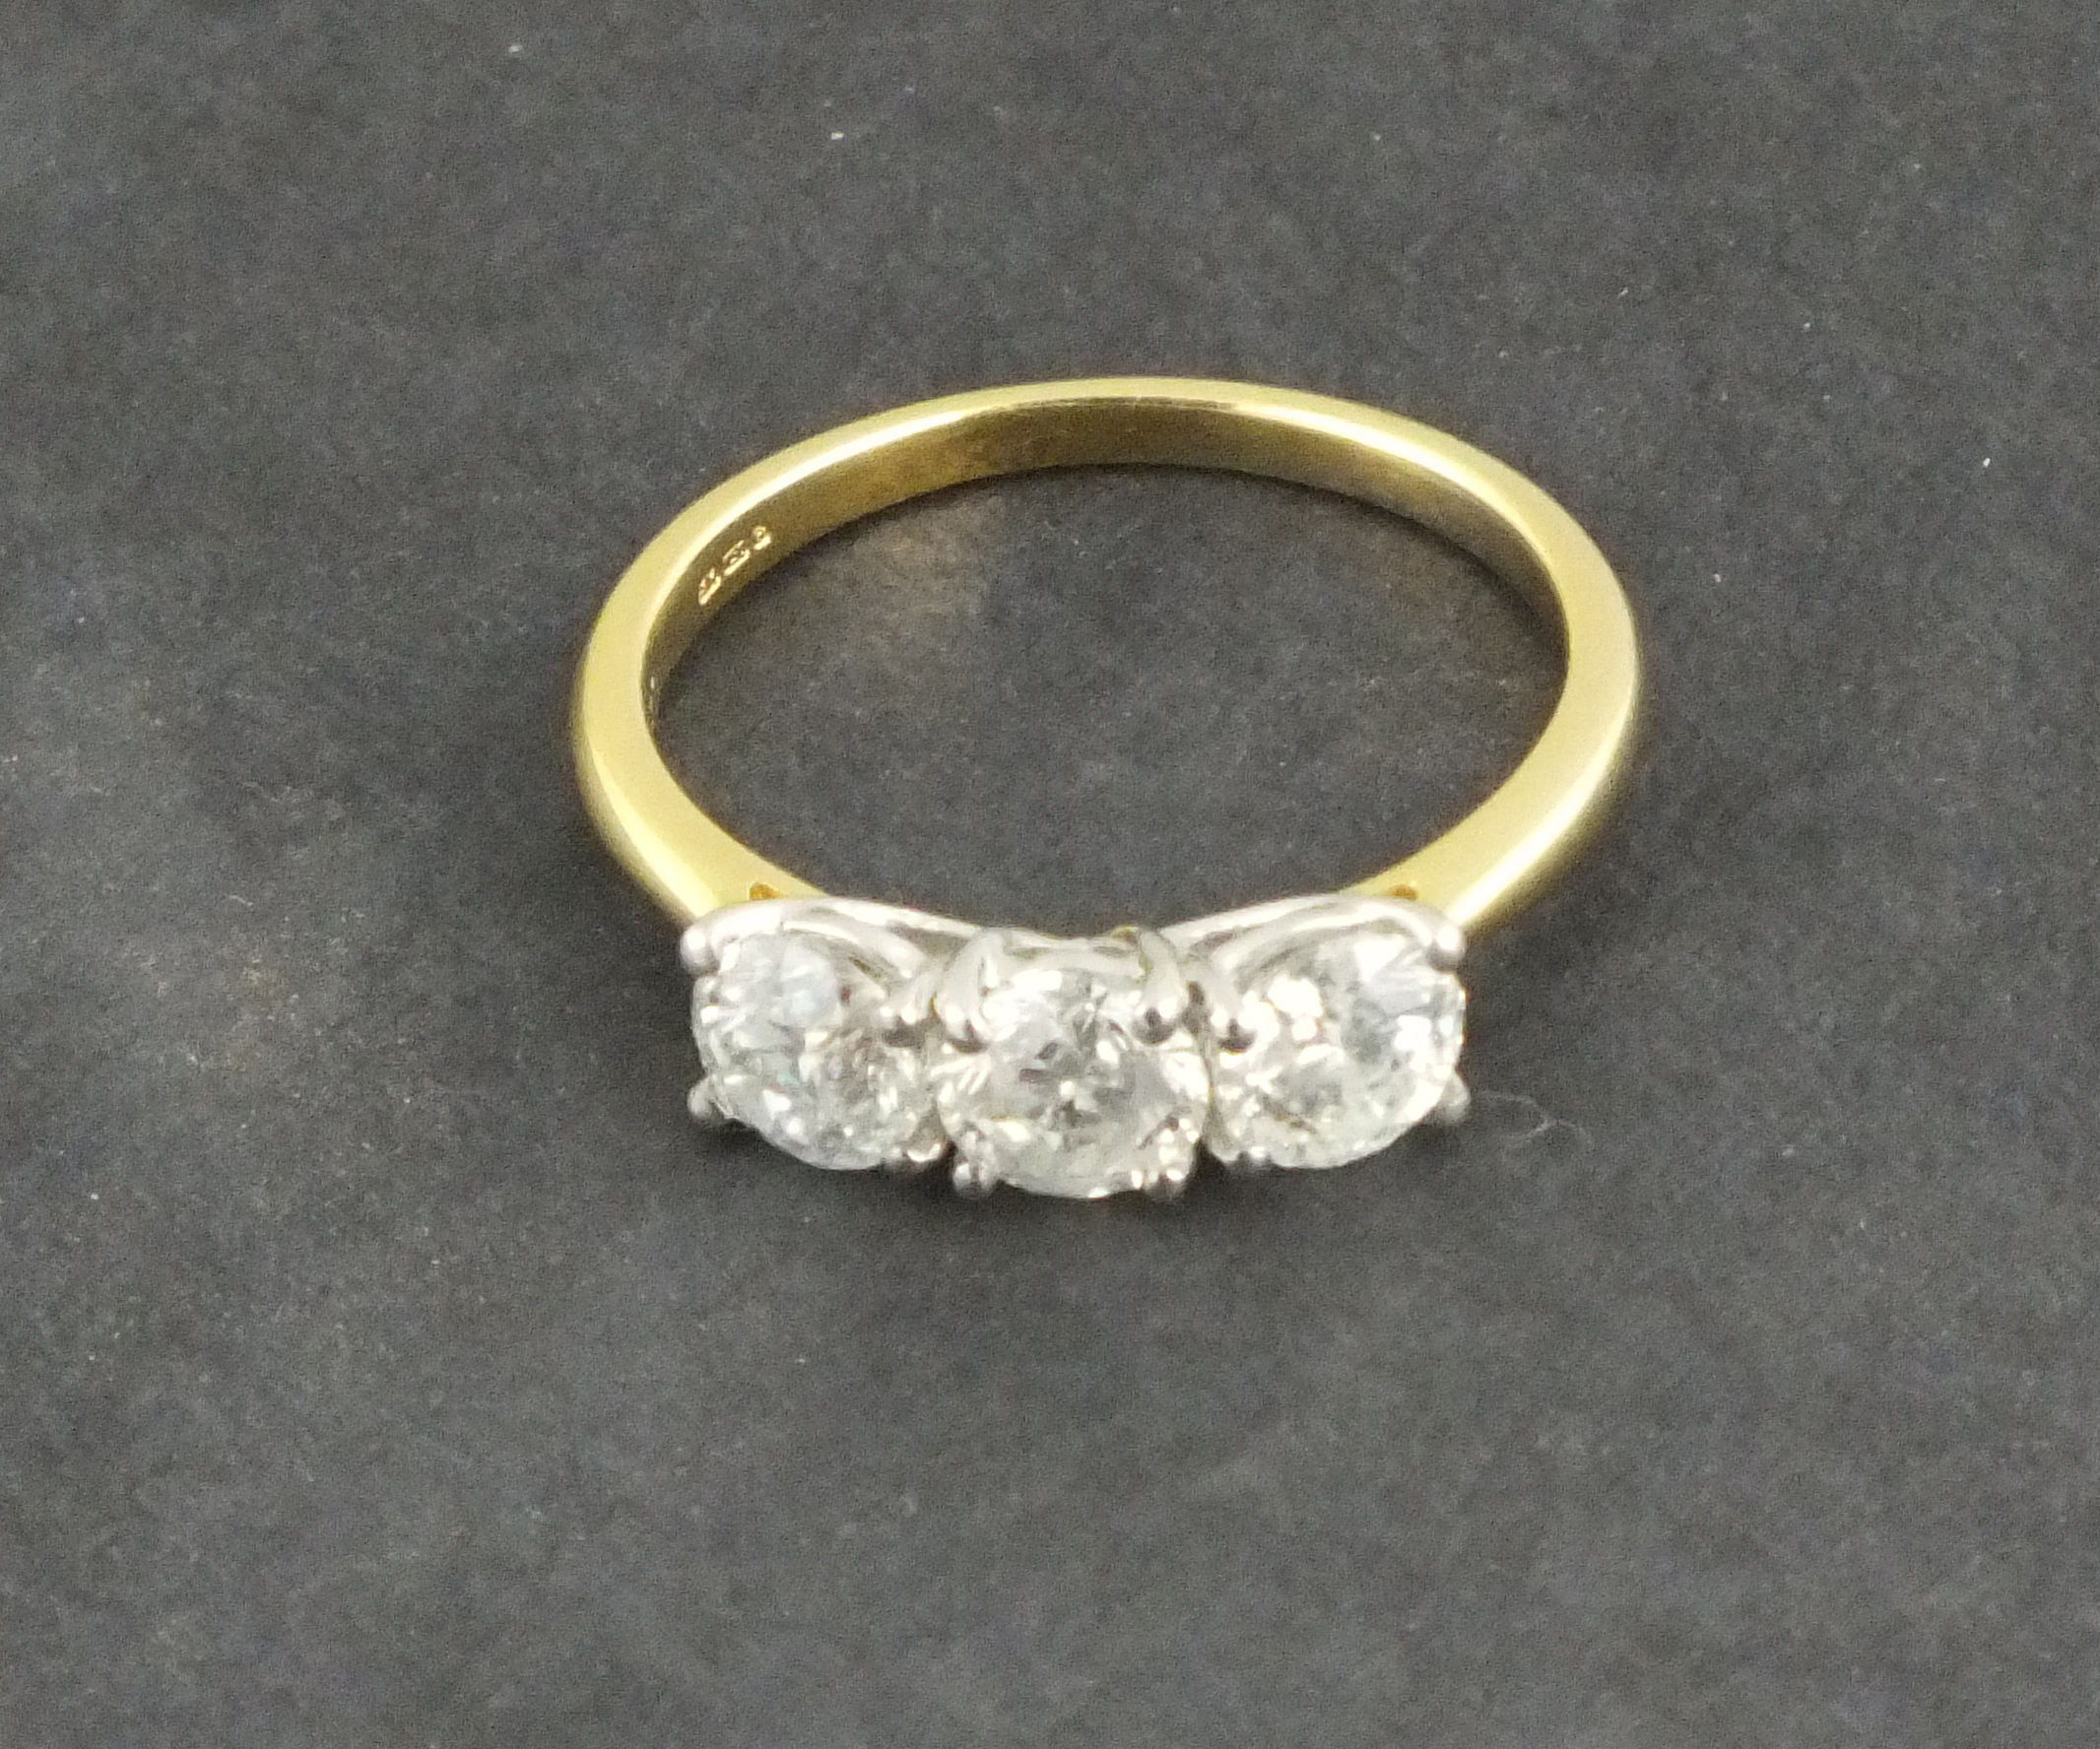 A three stone diamond ring, the brilliant cut stones totalling approx. 1.53ct, set in 18ct yellow